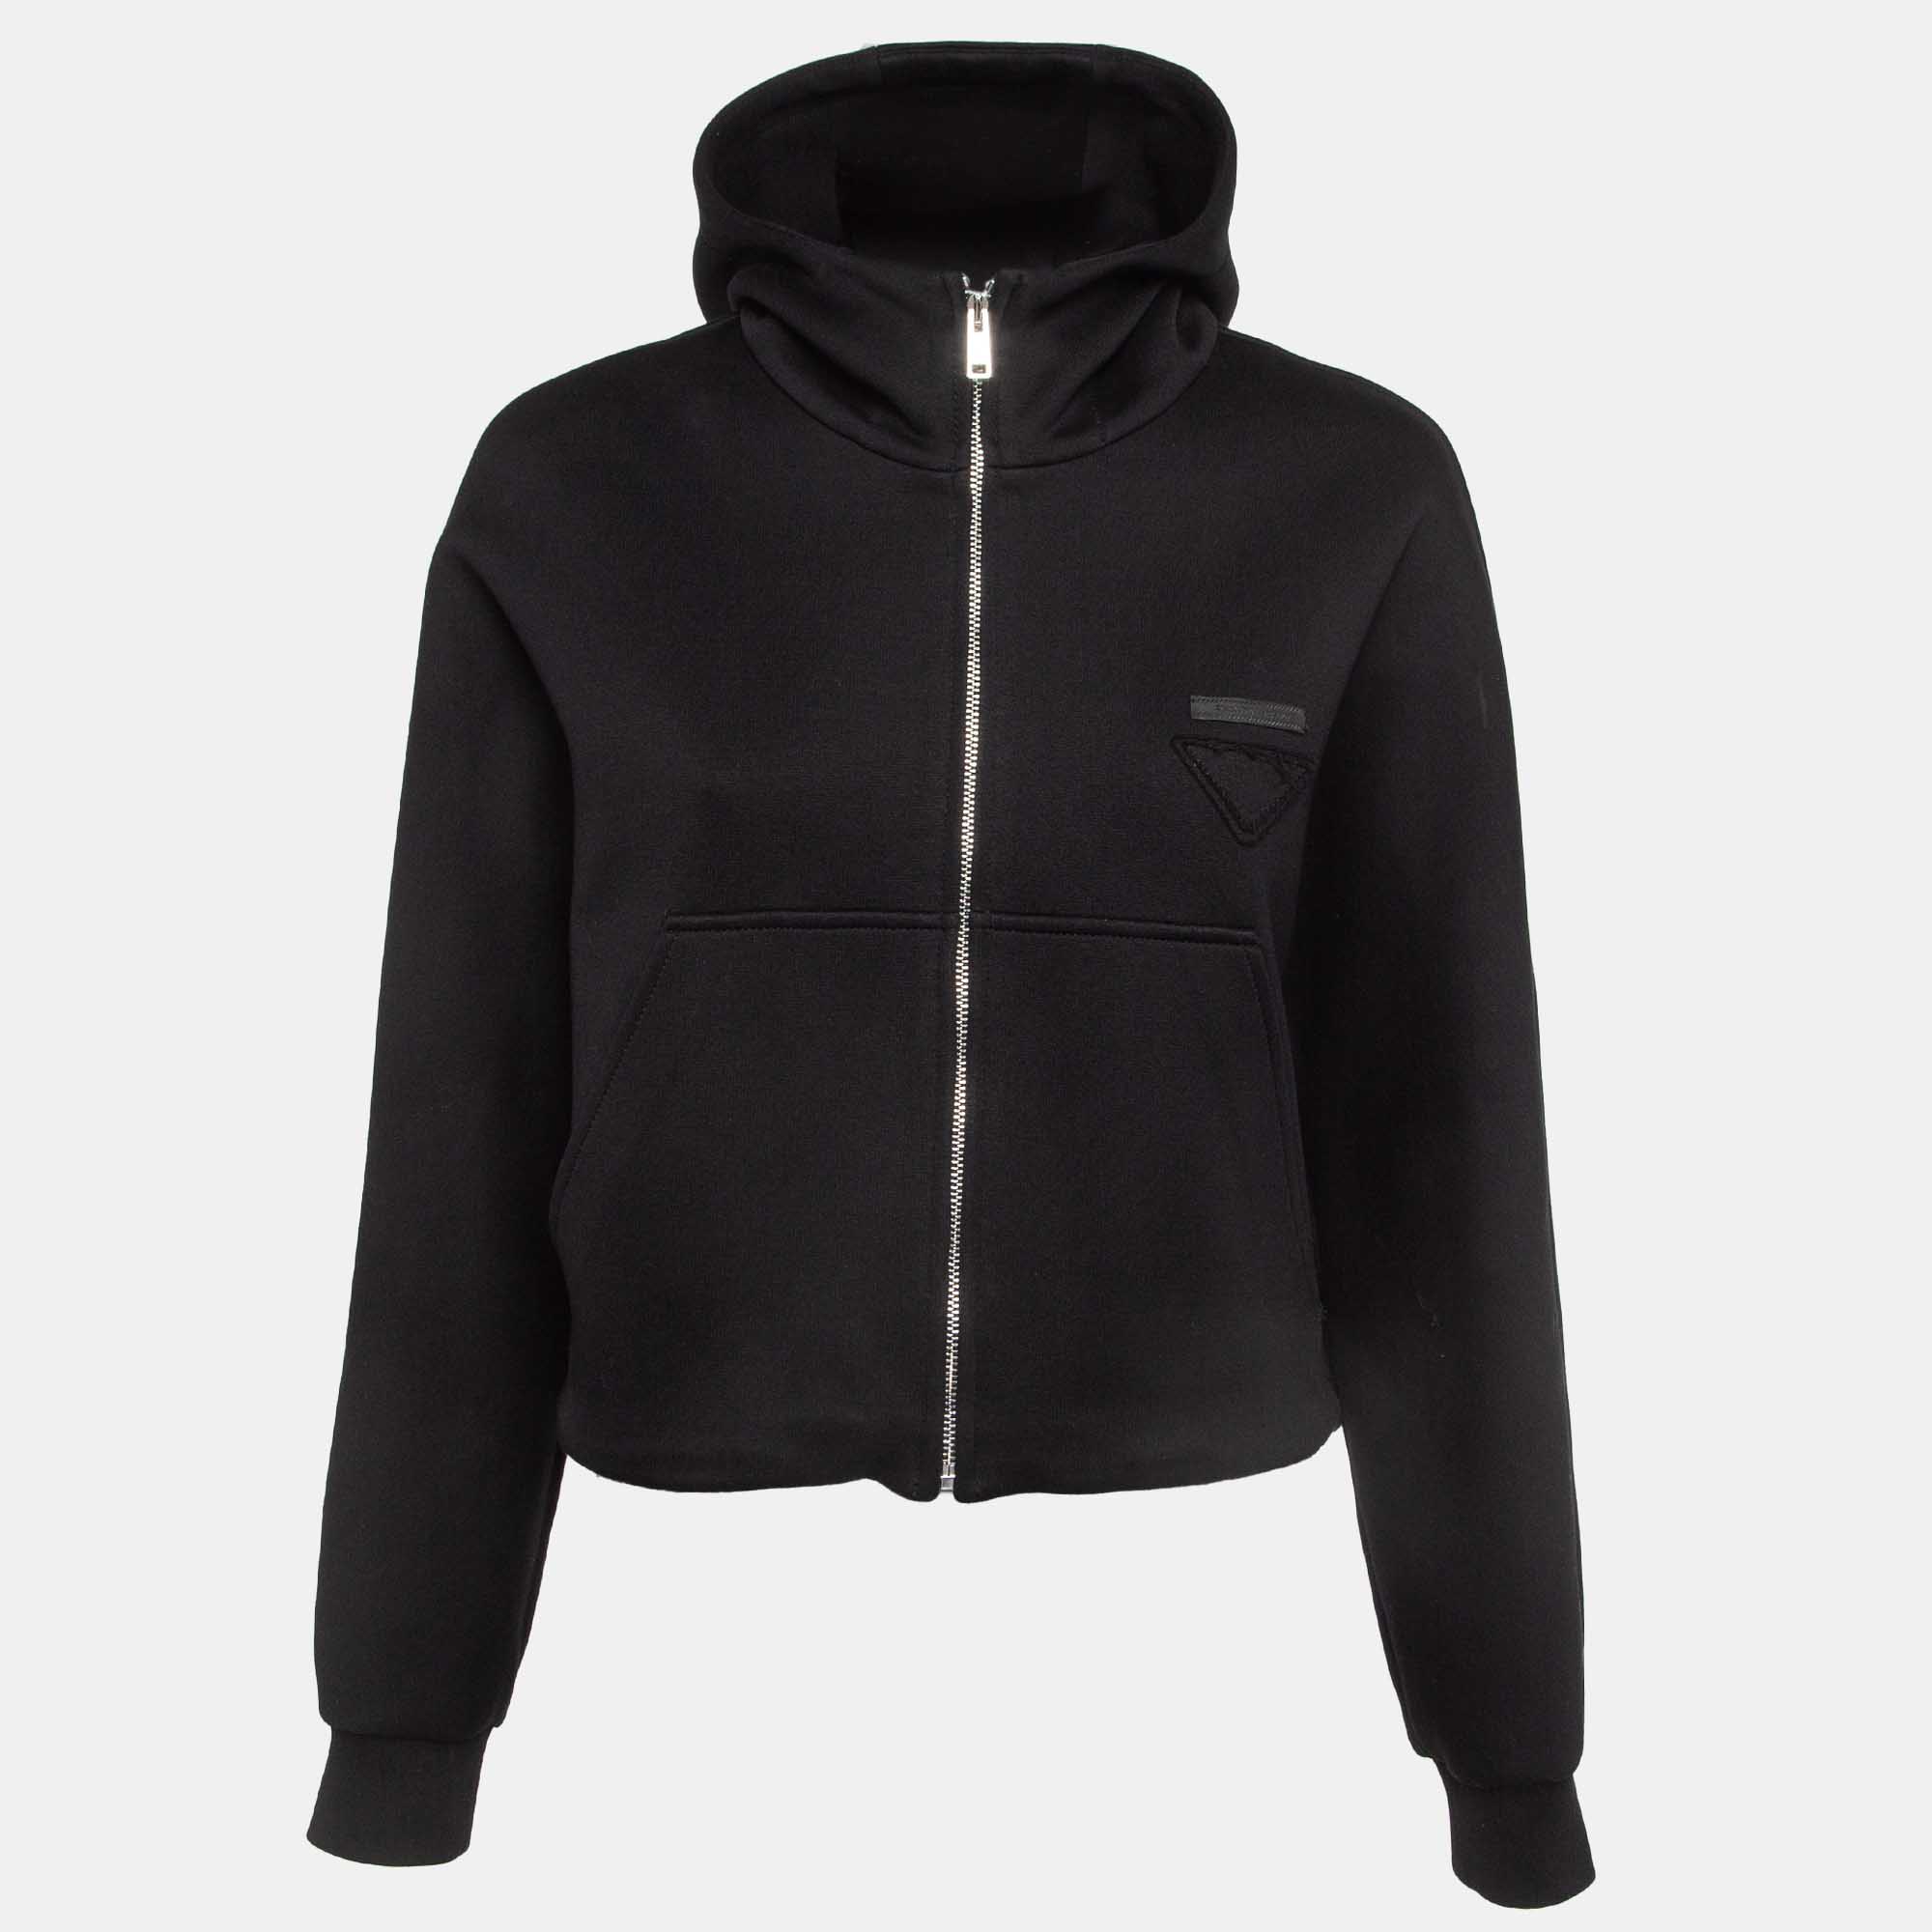 This Prada black hoodie for women is all about sporting a classy and comfy style. It is tailored from soft fabric and has signature accents.